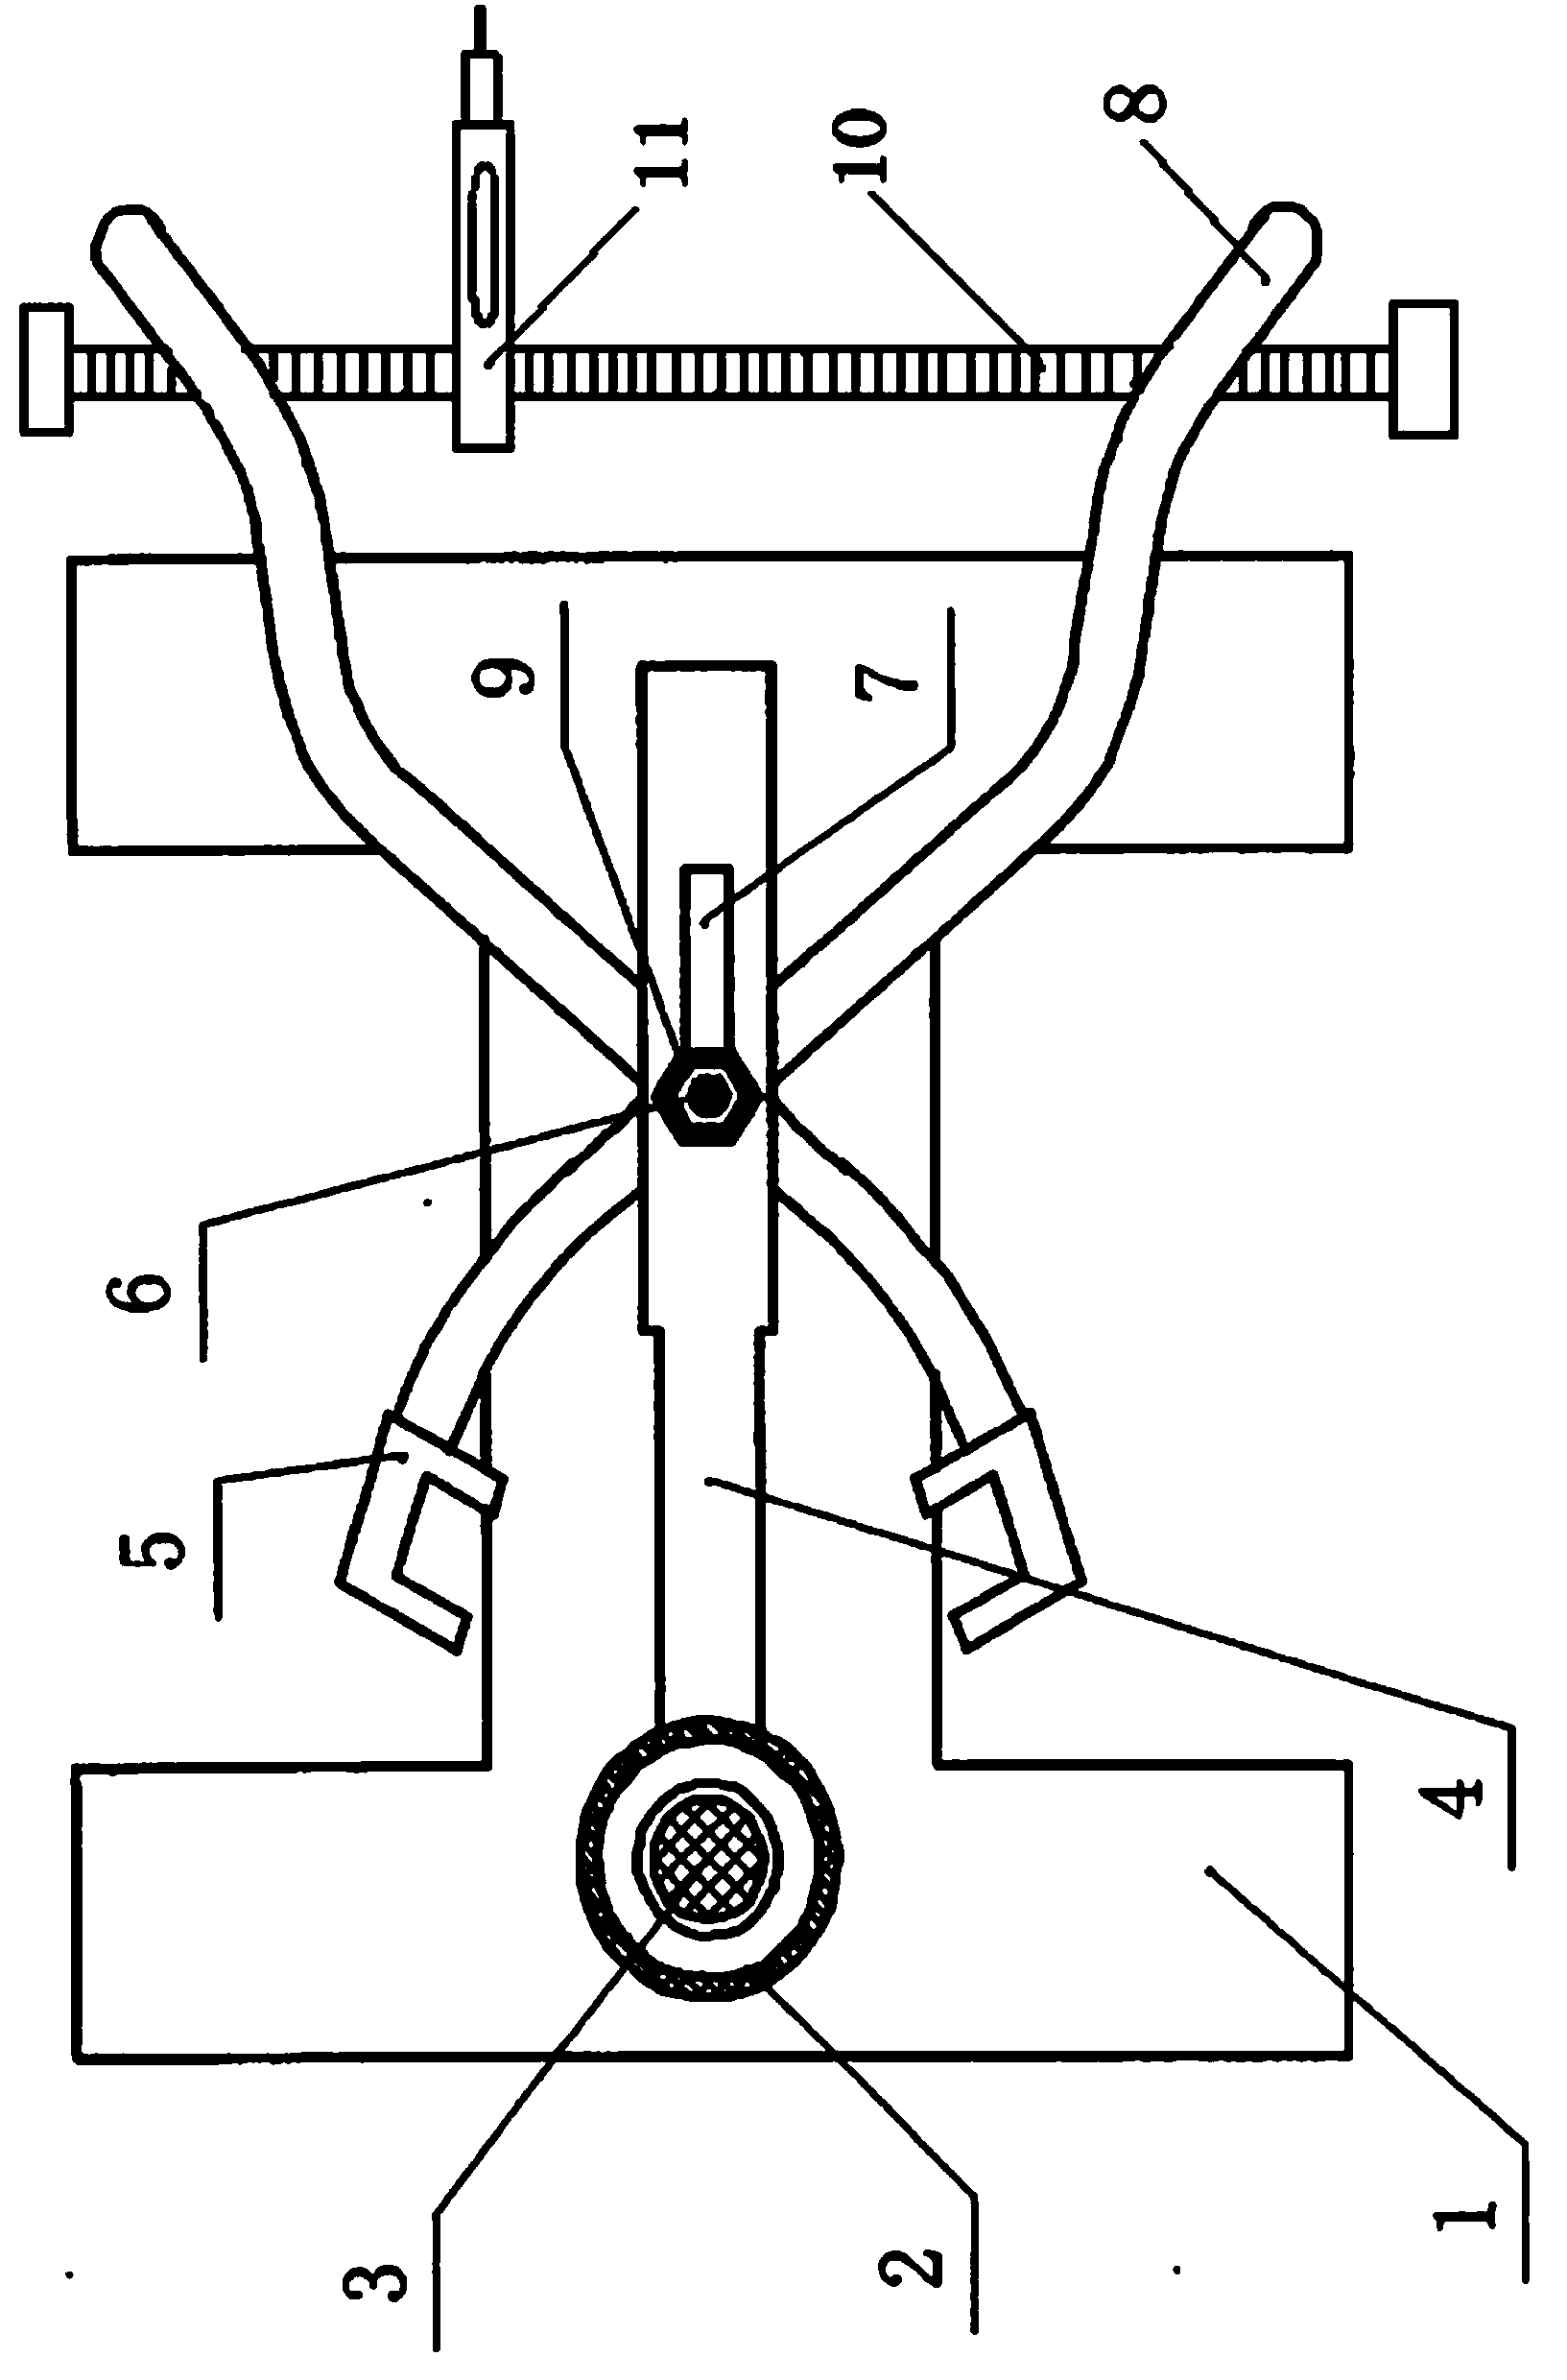 Isolation-switch contact-finger dismounting device